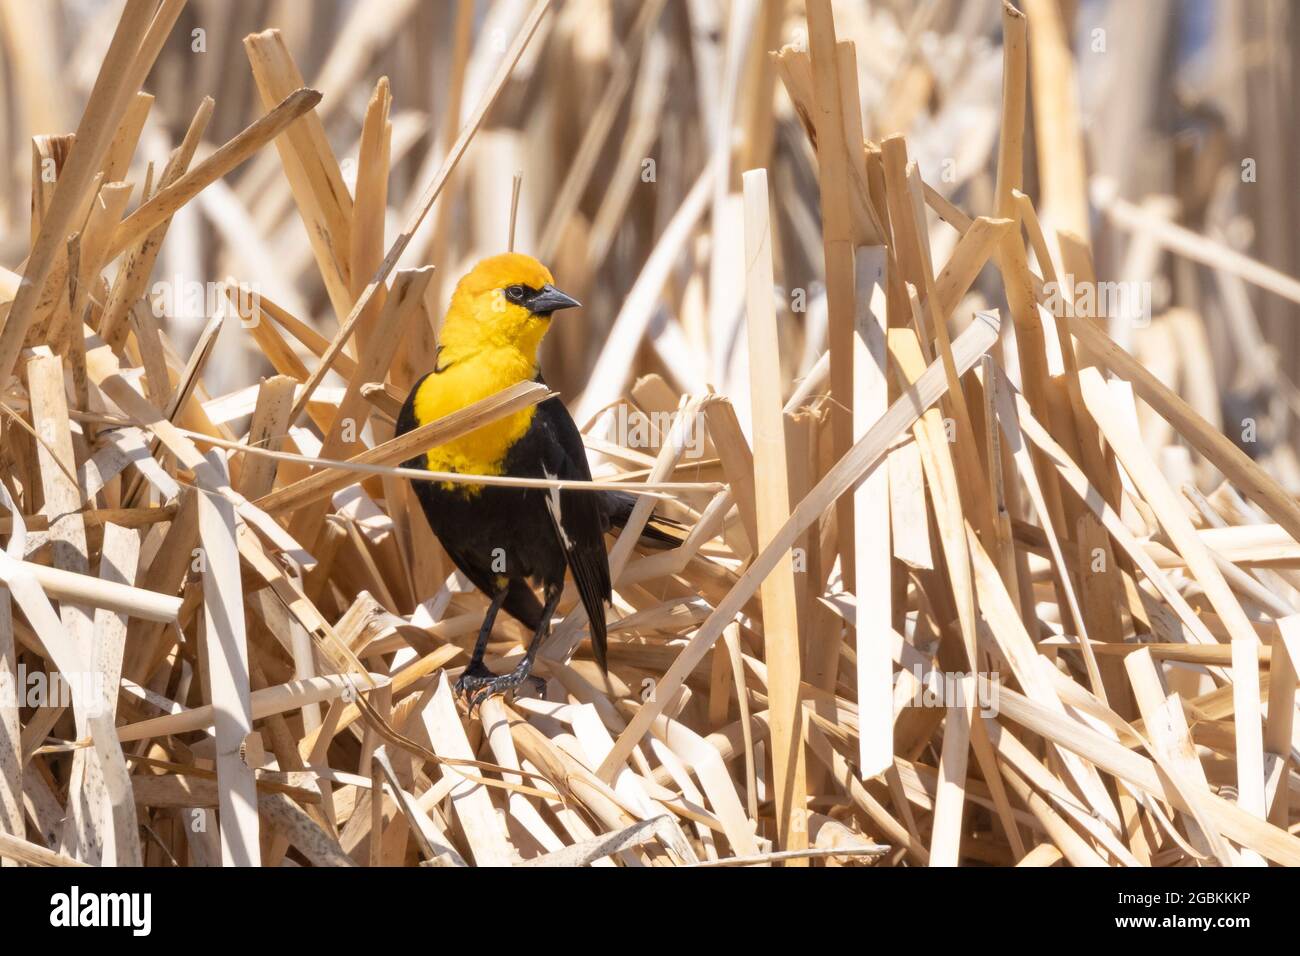 Male Yellow-headed Blackbird in the Reeds Stock Photo